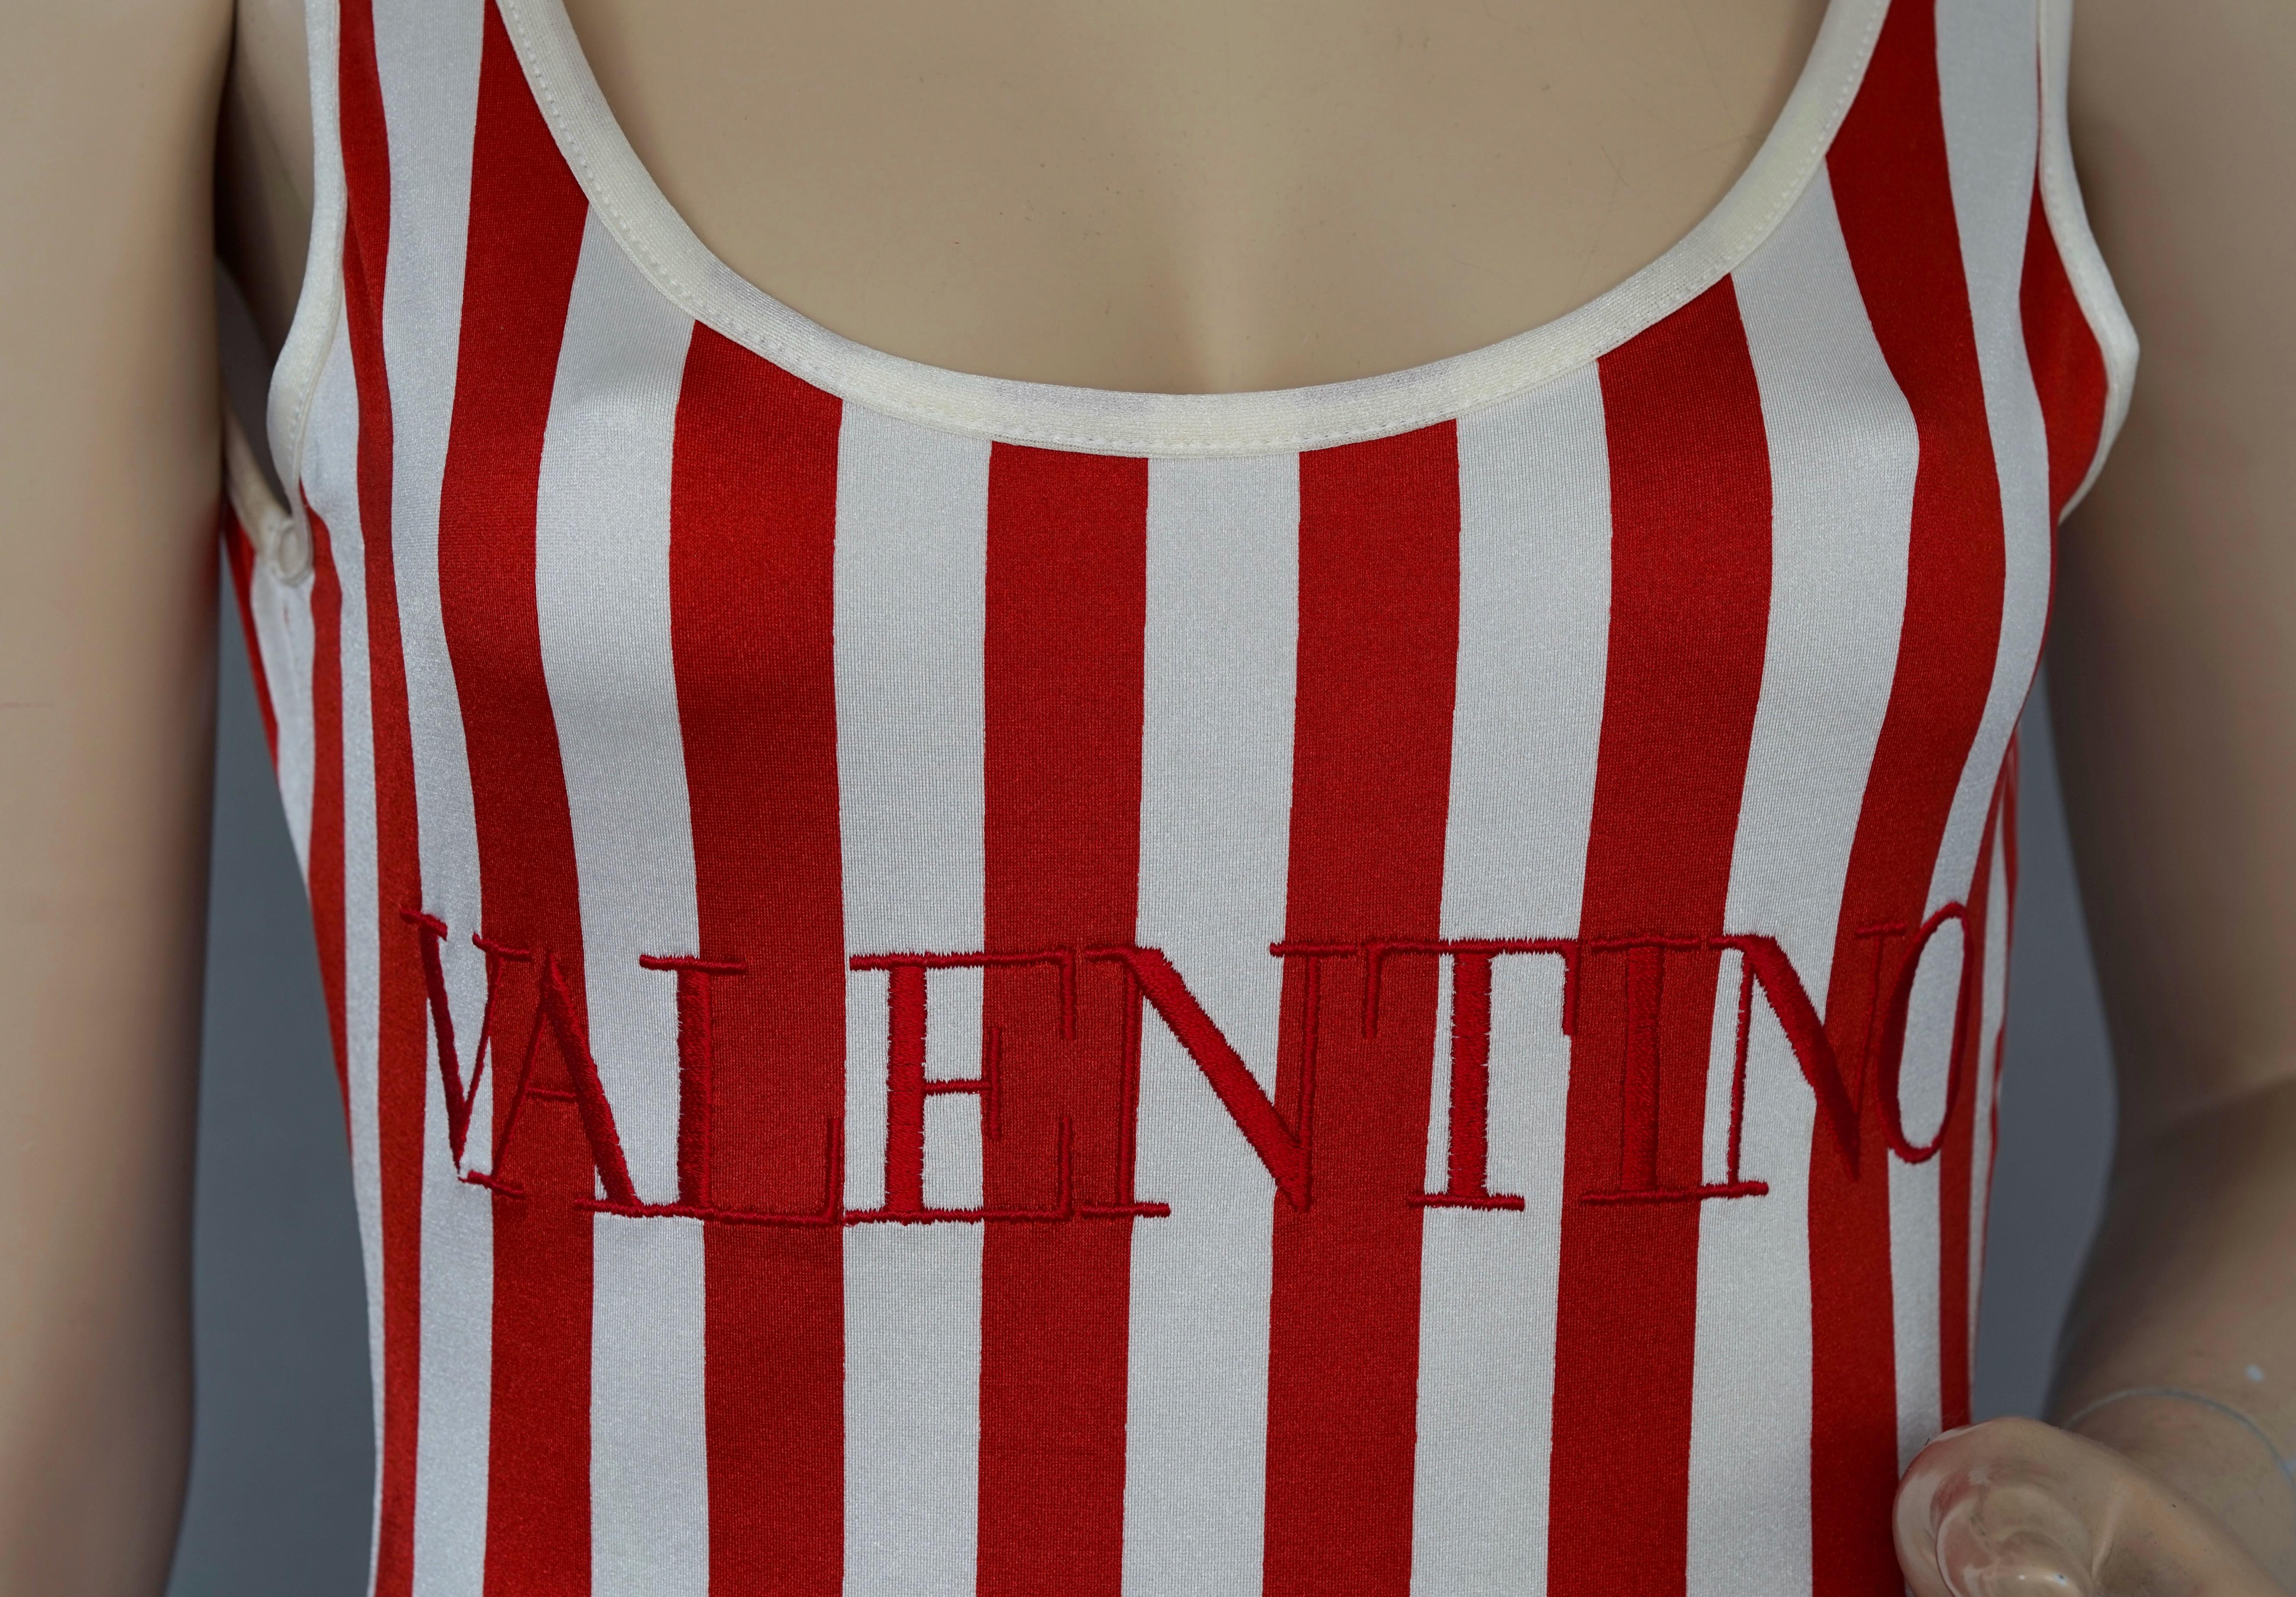 Vintage VALENTINO Logo Stripe  Swimsuit 

Measurements taken laid flat, please double bust, waist and hips:
Shoulder: 10.82 inches (27.5 cm) without stretching
Bust: 13.77 inches (35 cm) without stretching
Waist: 11.41 inches (29 cm) without